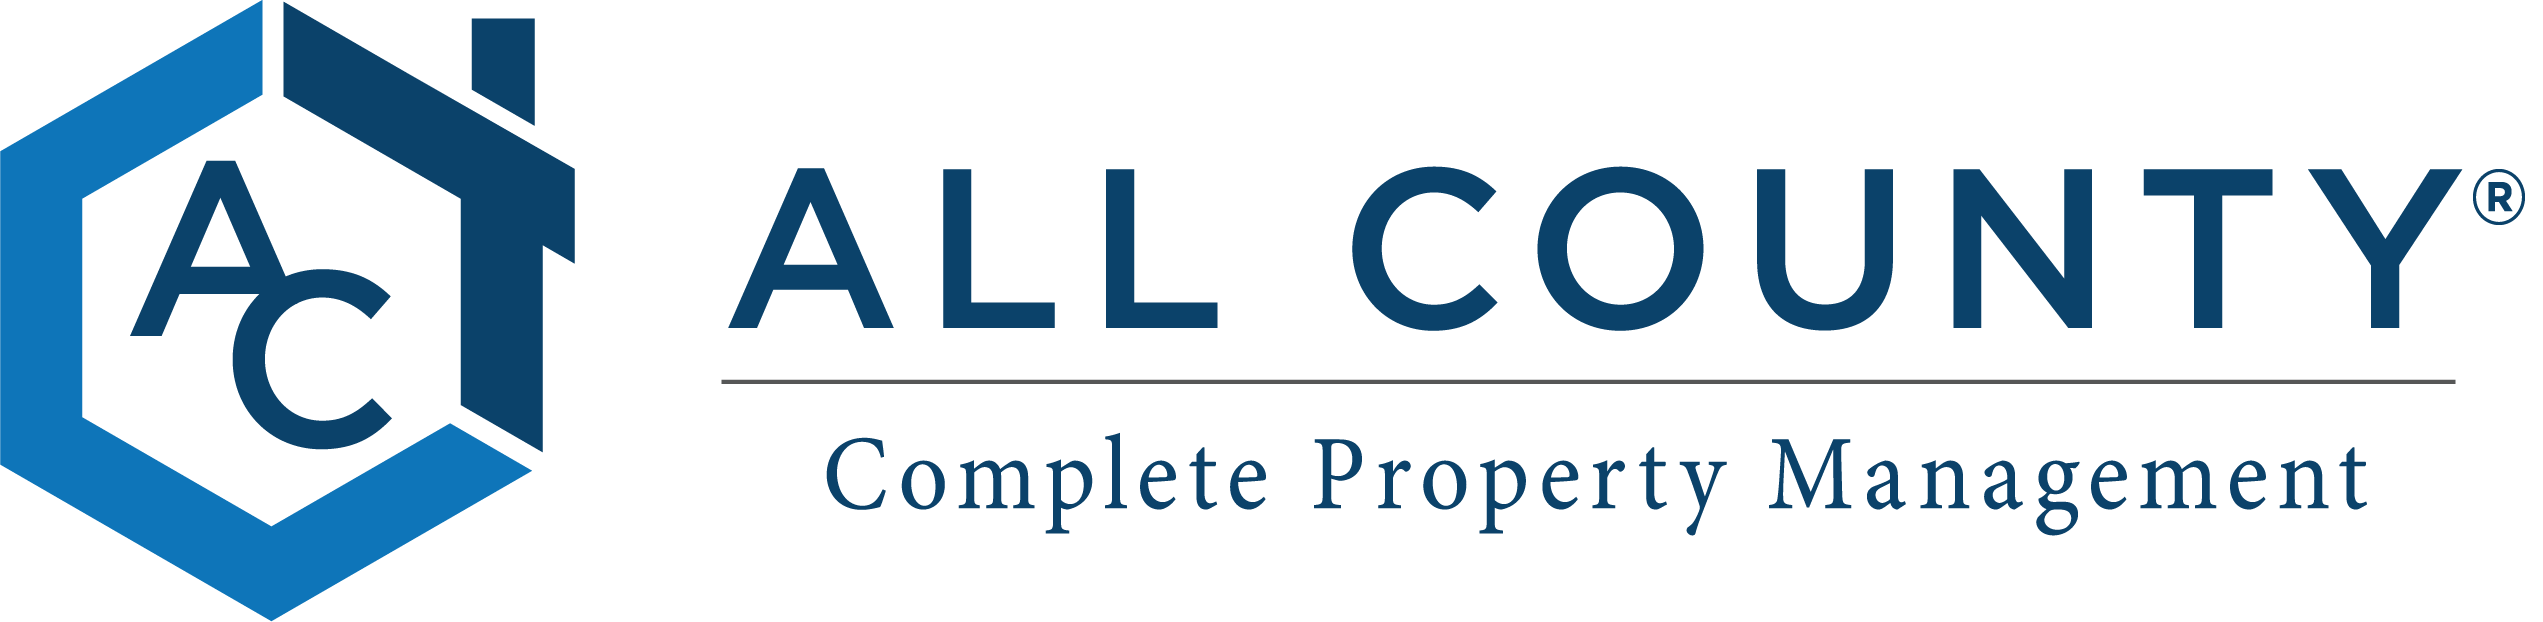 All County Complete Property Management